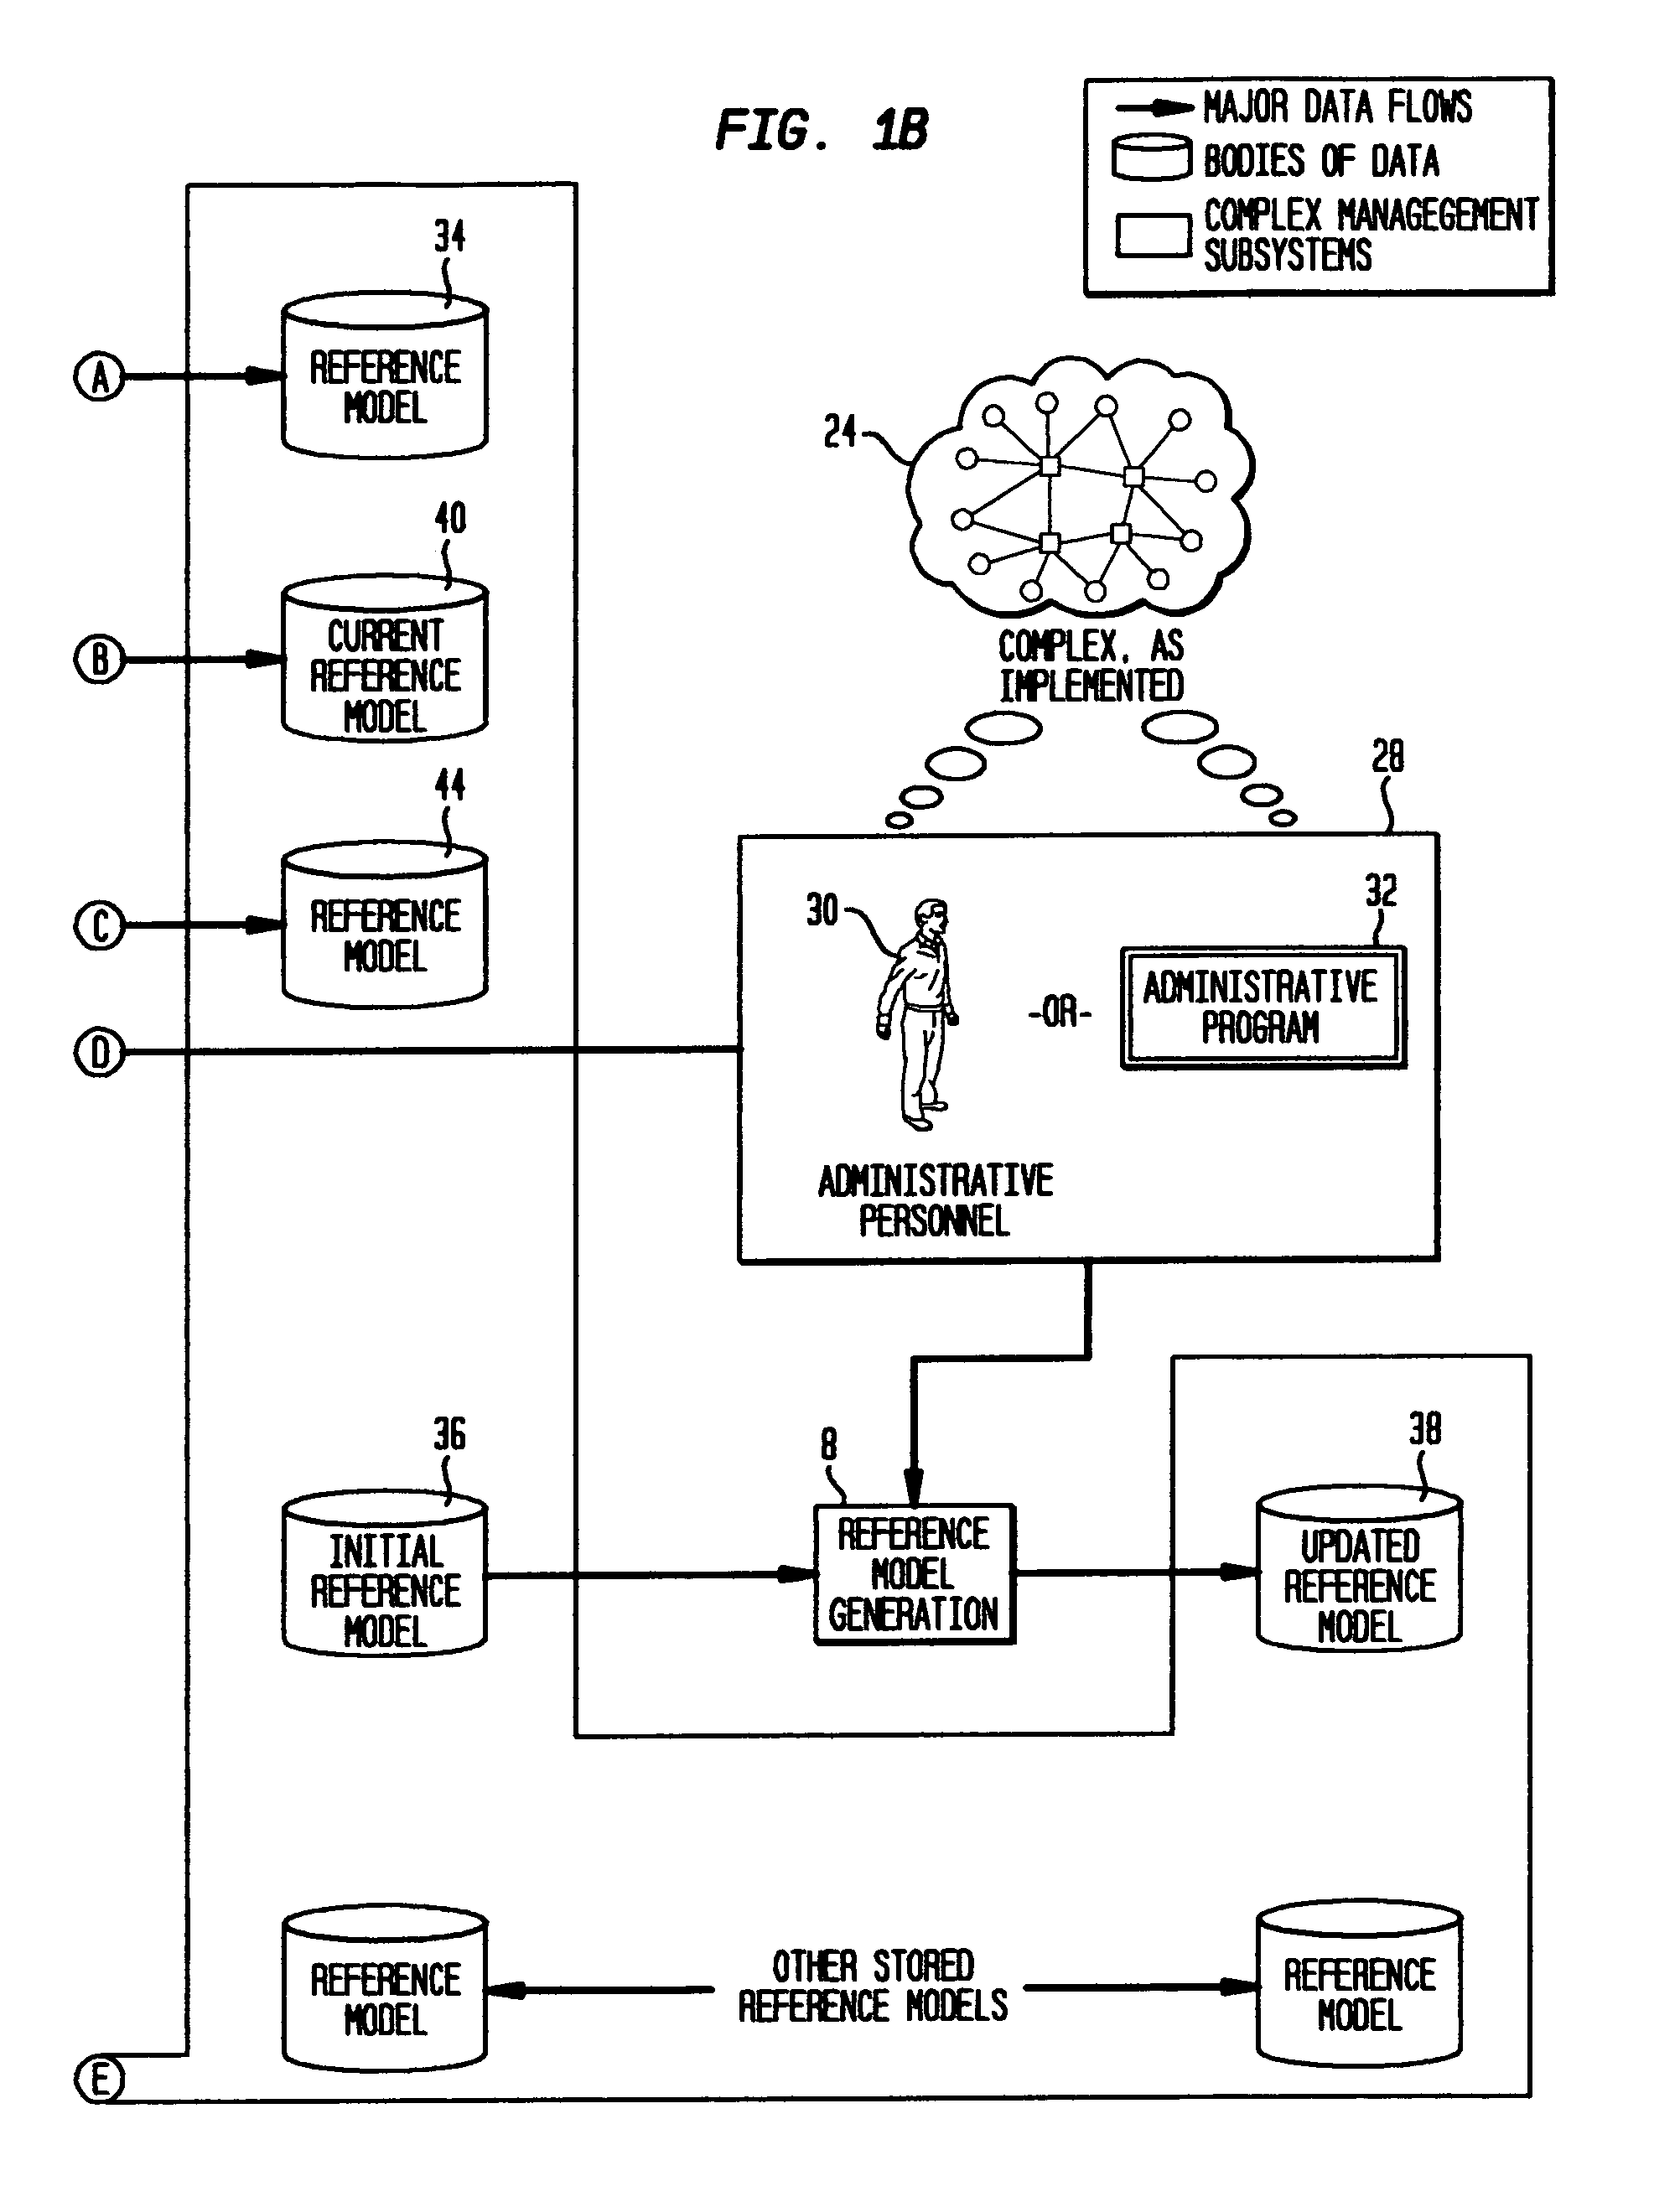 Method and apparatus for reference model change generation in managed systems